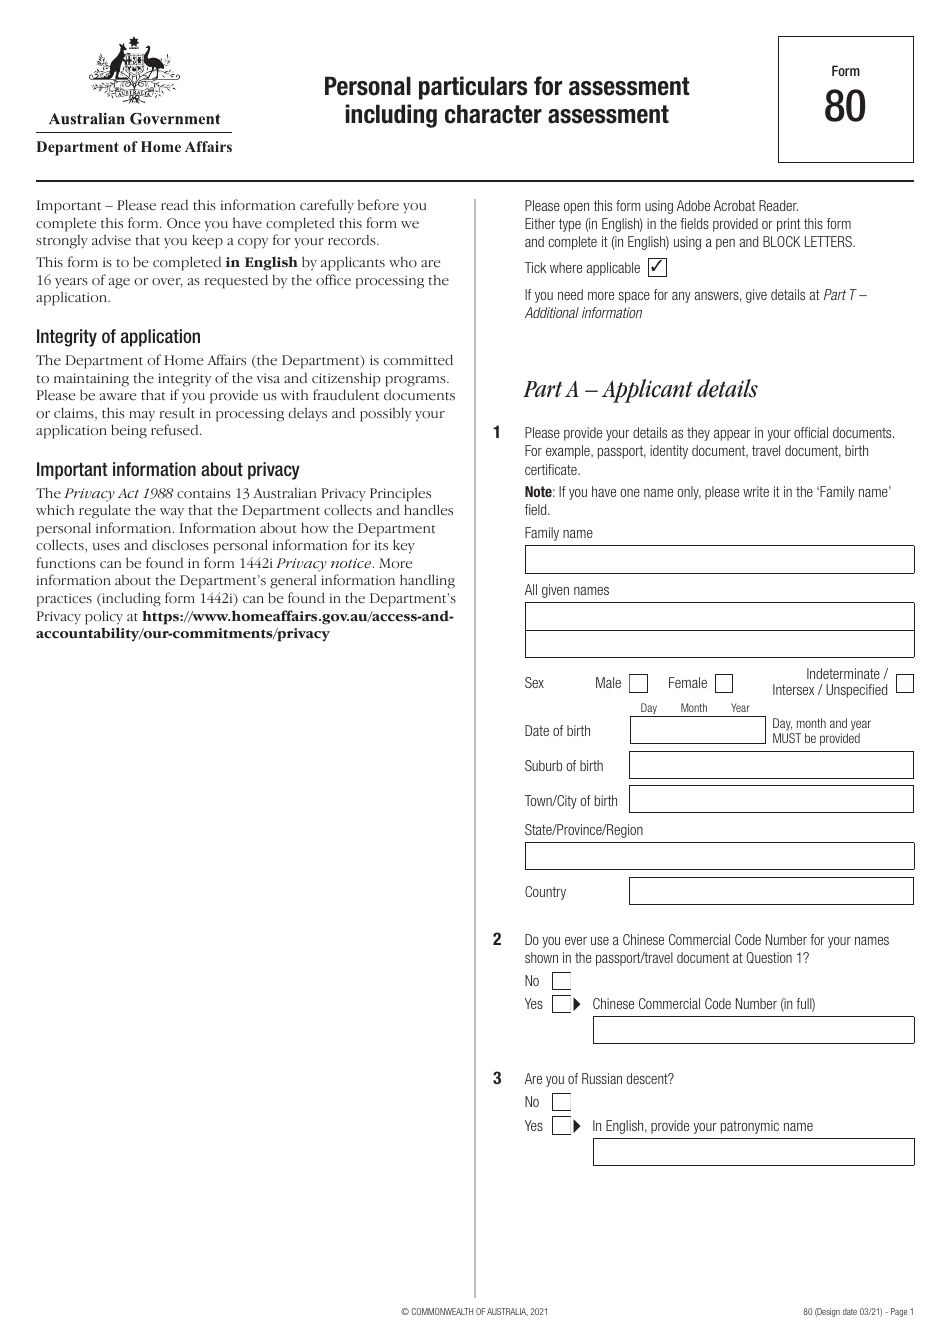 Form 80 Personal Particulars for Assessment Including Character Assessment - Australia, Page 1